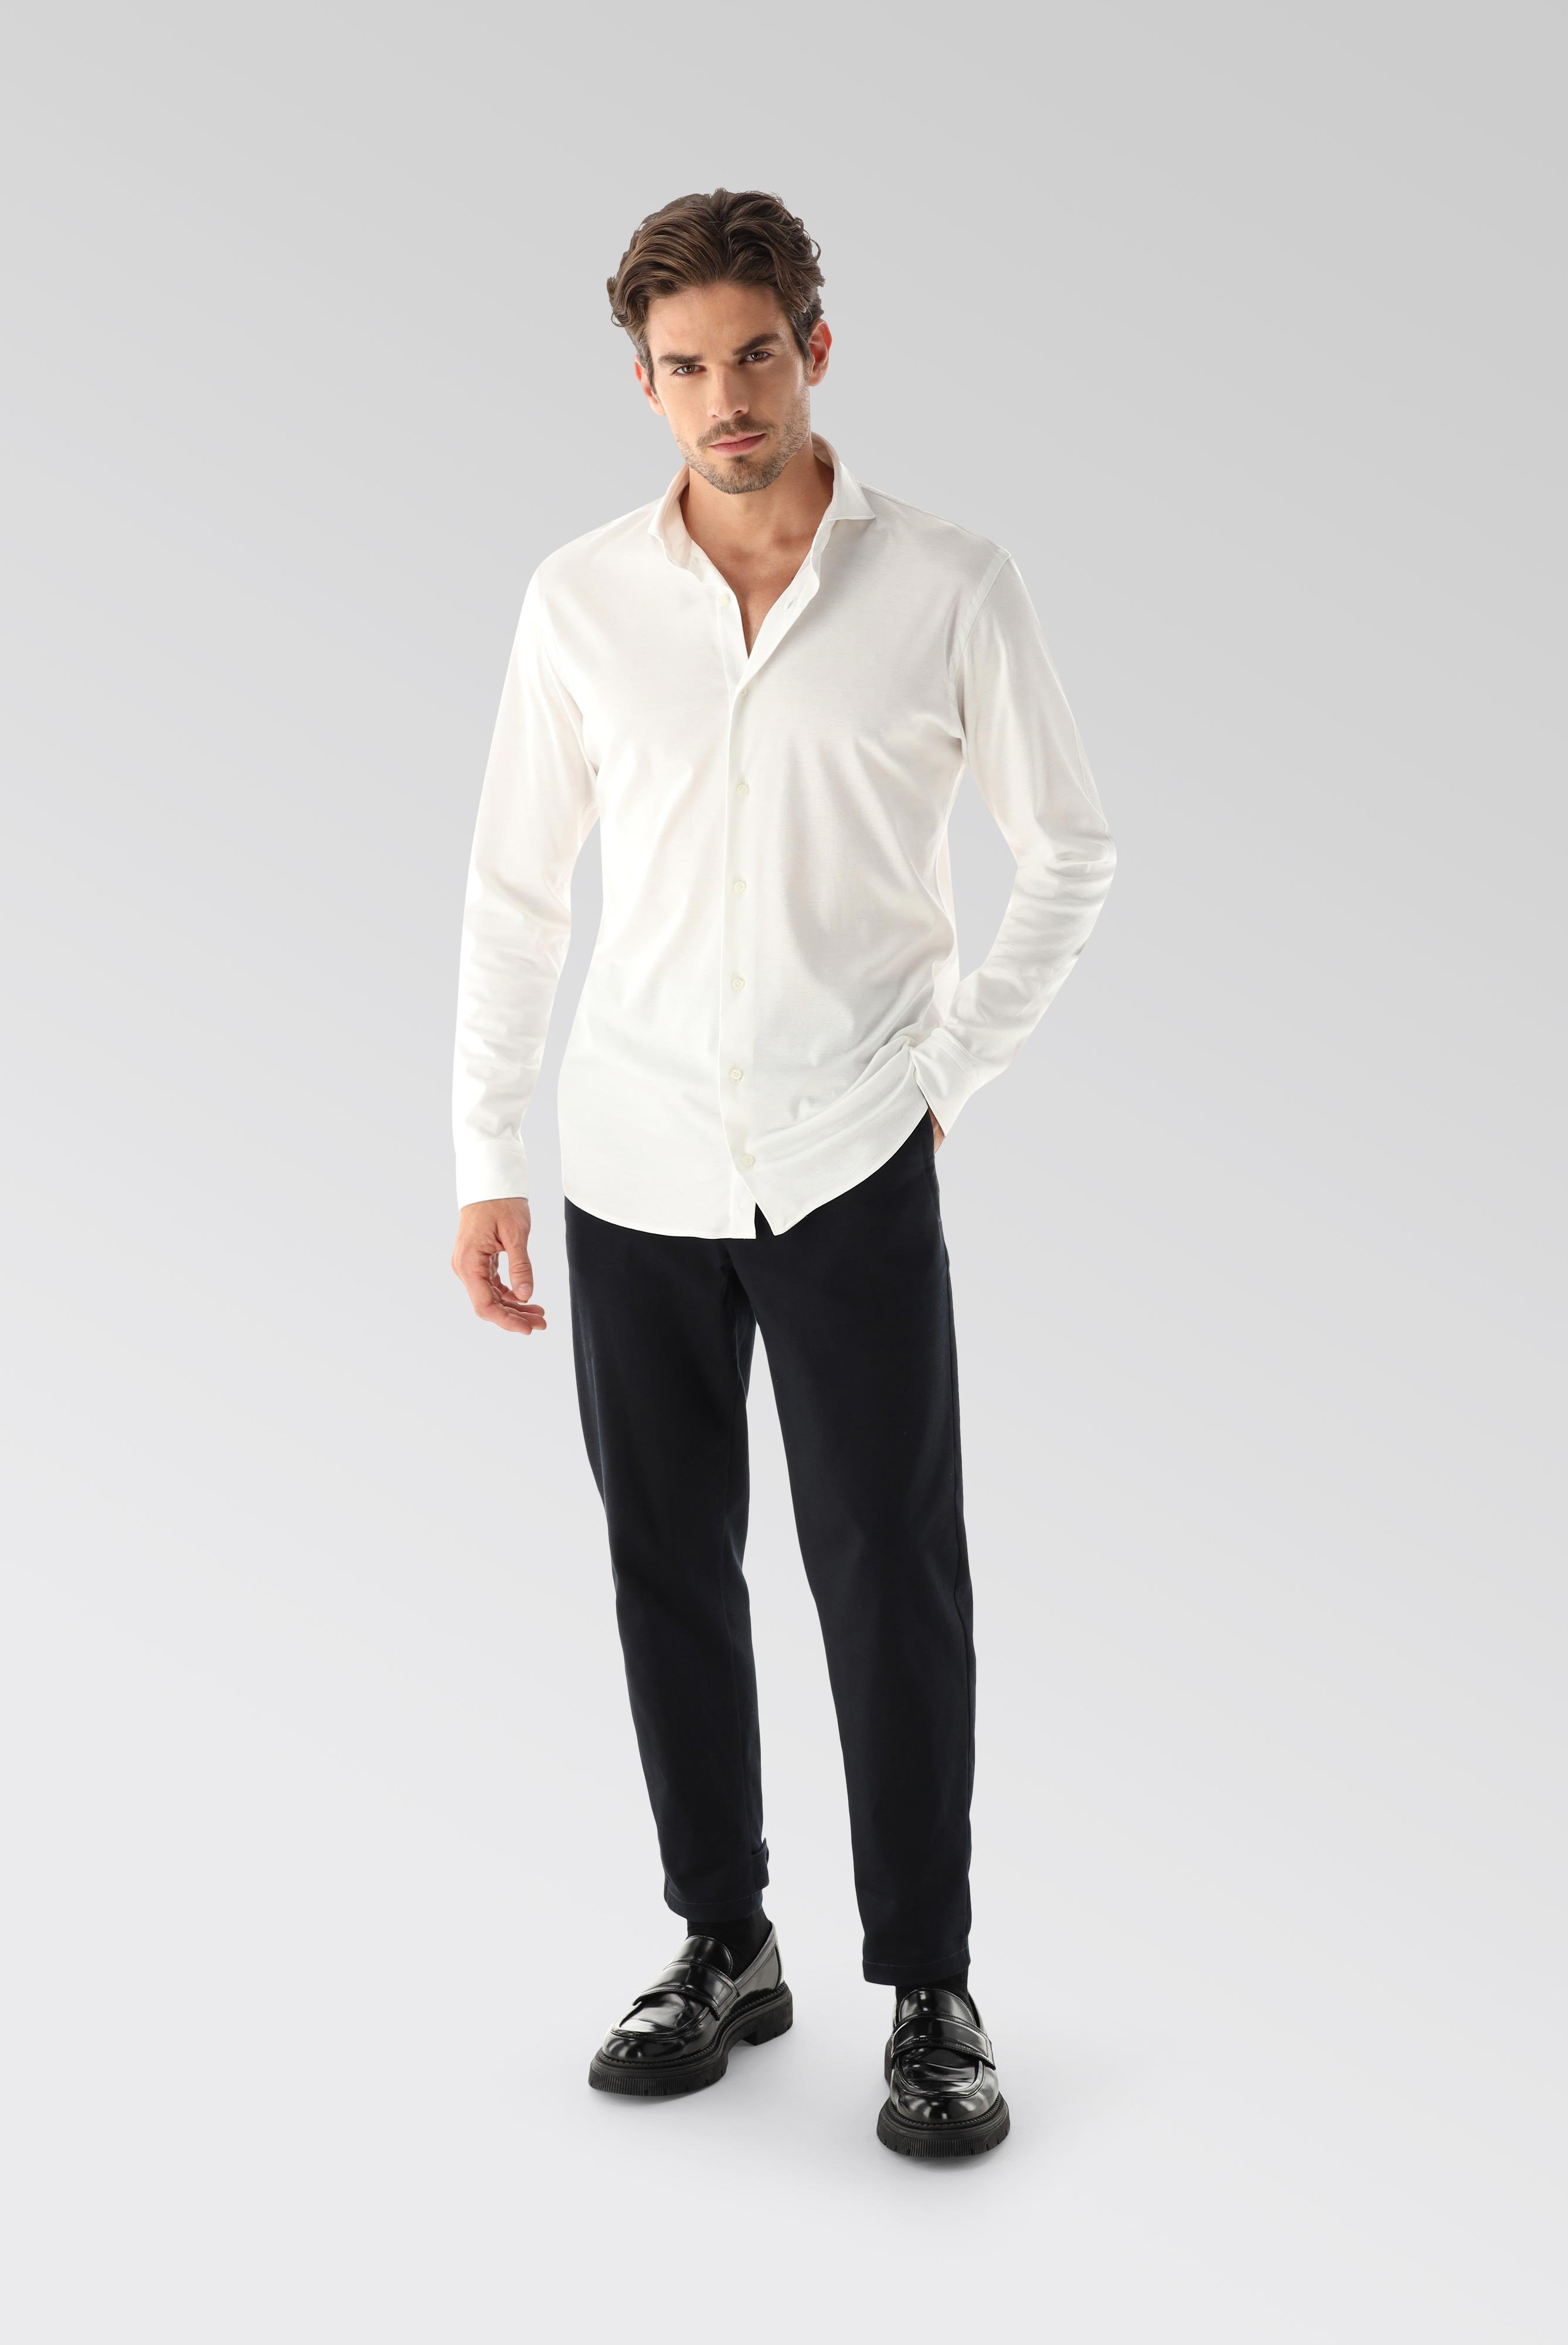 Easy Iron Shirts+Swiss Cotton Jersey Shirt Tailor Fit+20.1683.UC.180031.000.S